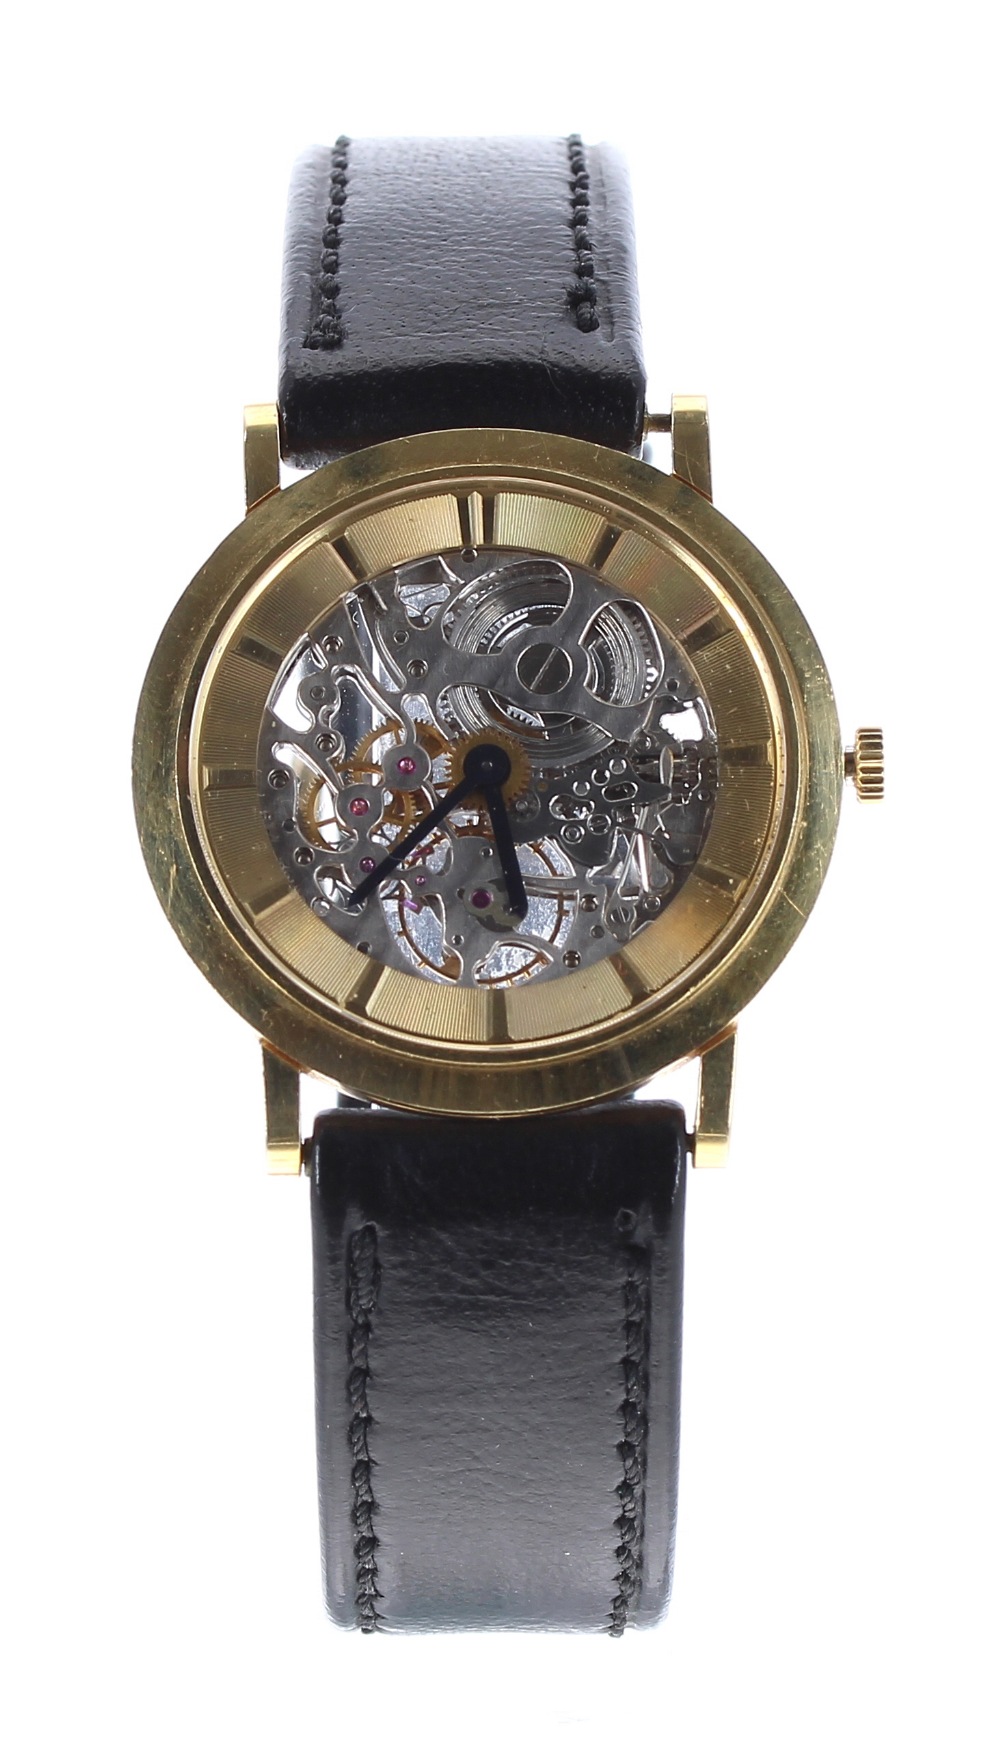 Bernard Golay 18ct gentleman's wristwatch, circular case with skeleton dial and exhibition back with